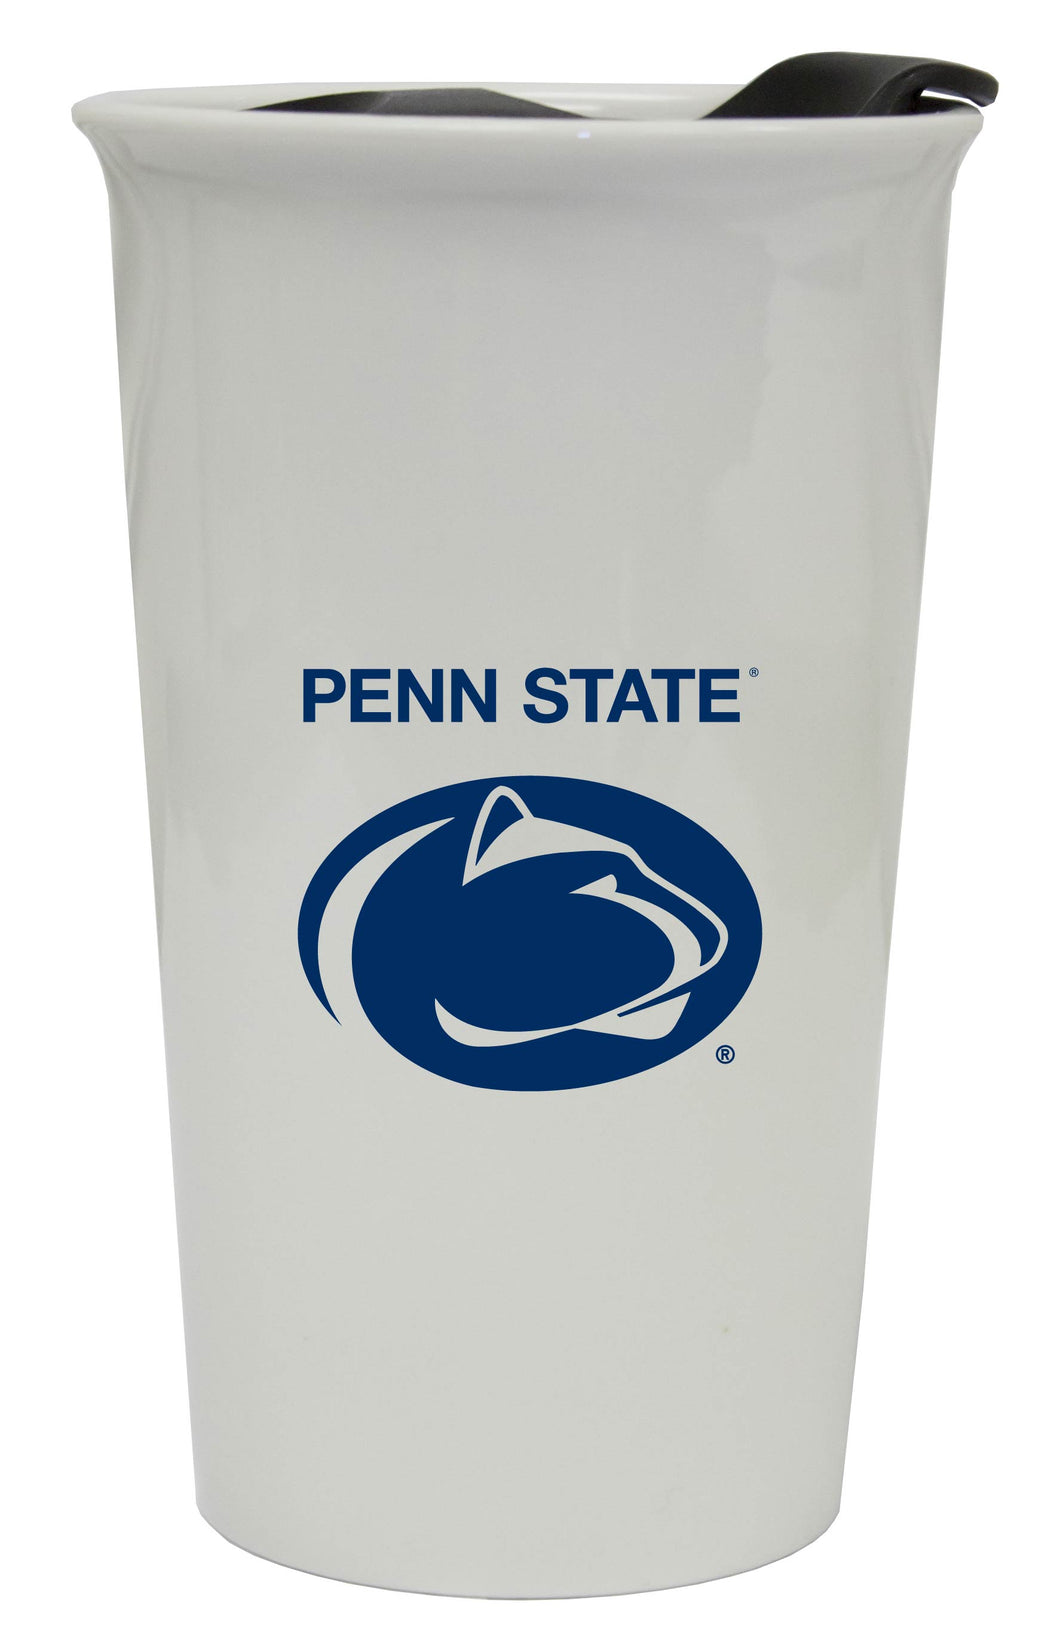 Penn State Nittany Lions Double Walled Ceramic Tumbler